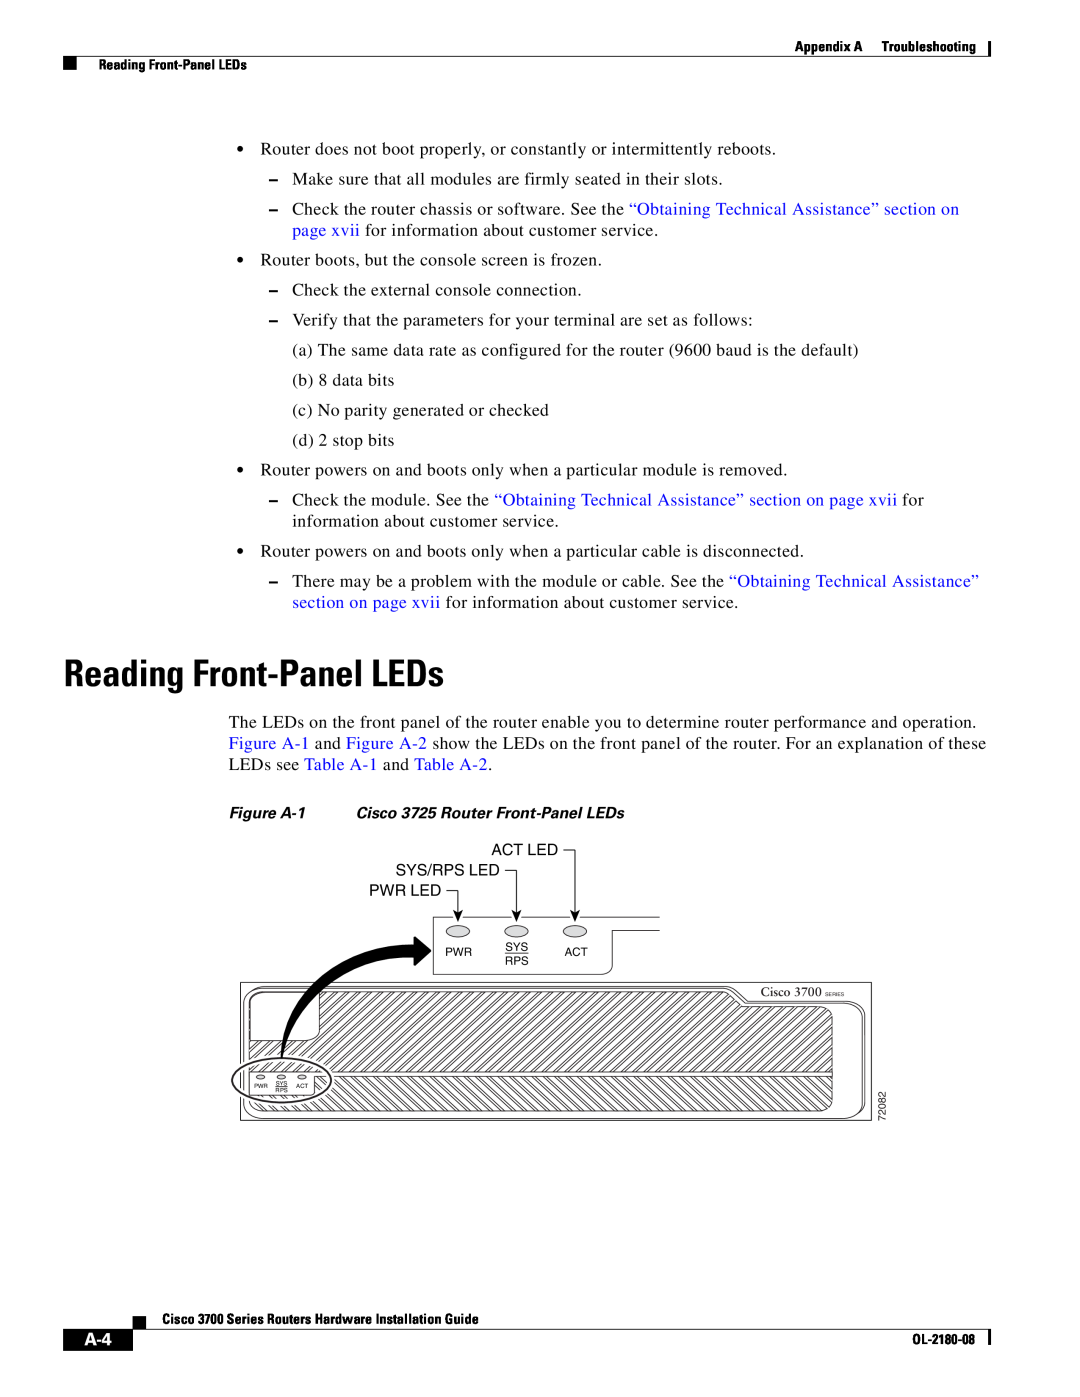 Cisco Systems 3700 Series manual Reading Front-Panel LEDs 